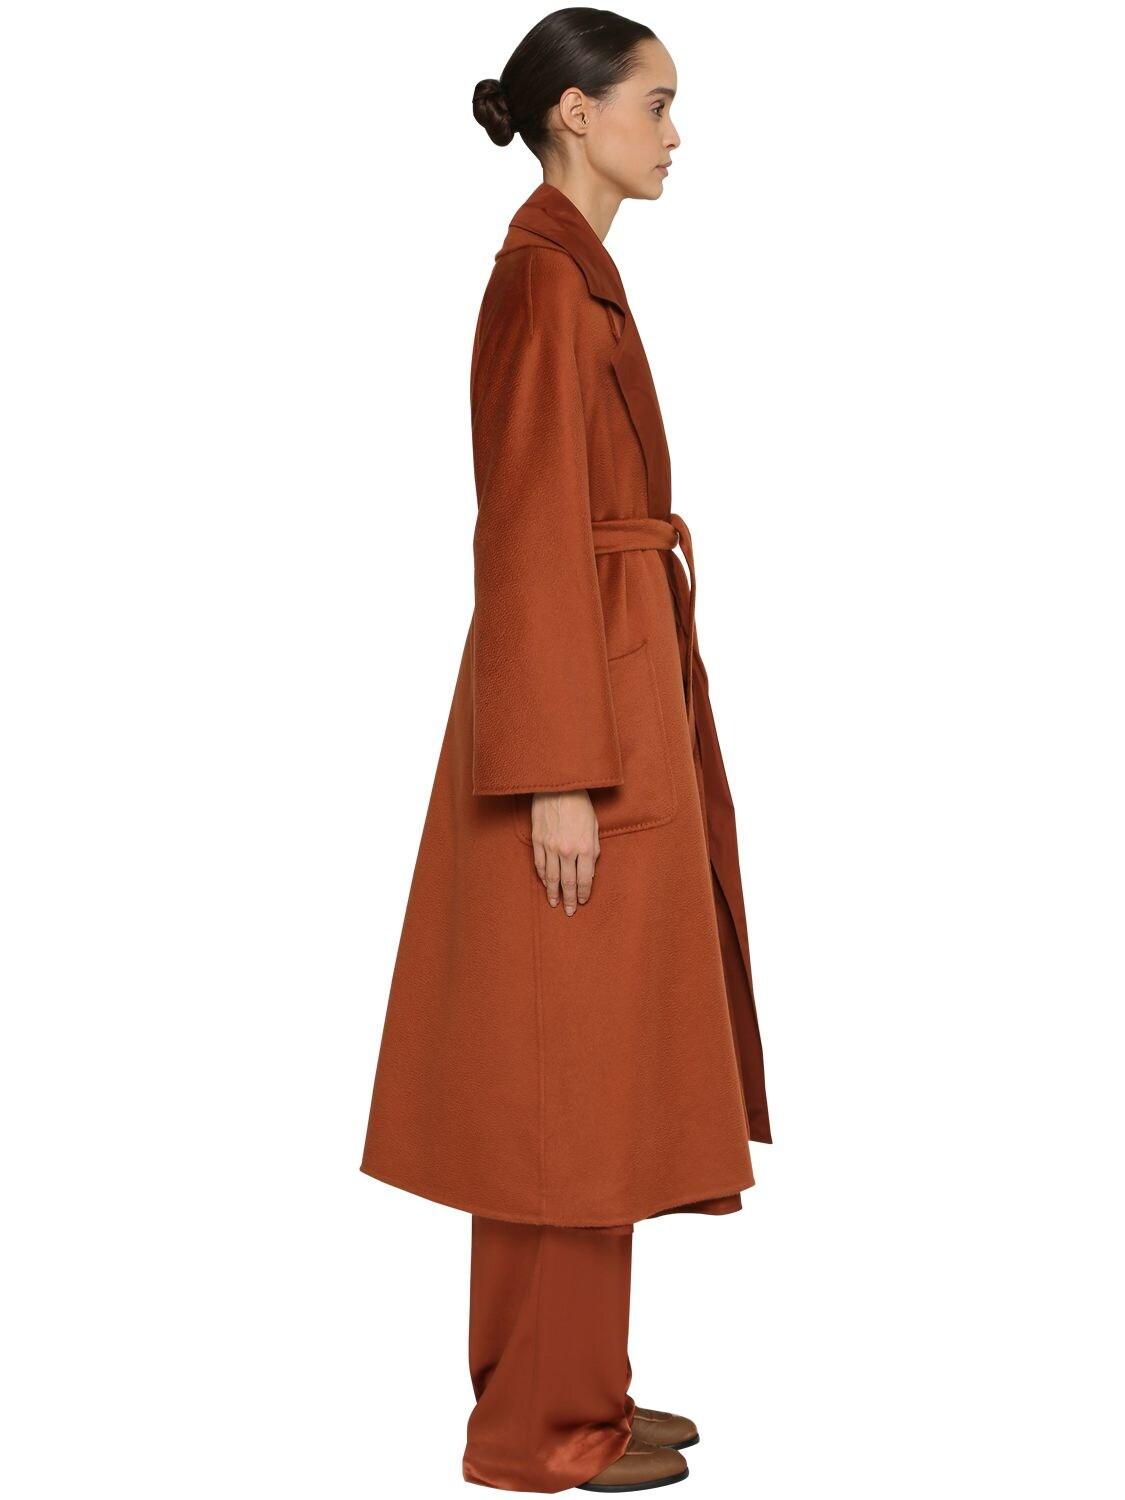 Max Mara Labbro Belted Cashmere Coat in Brown - Lyst